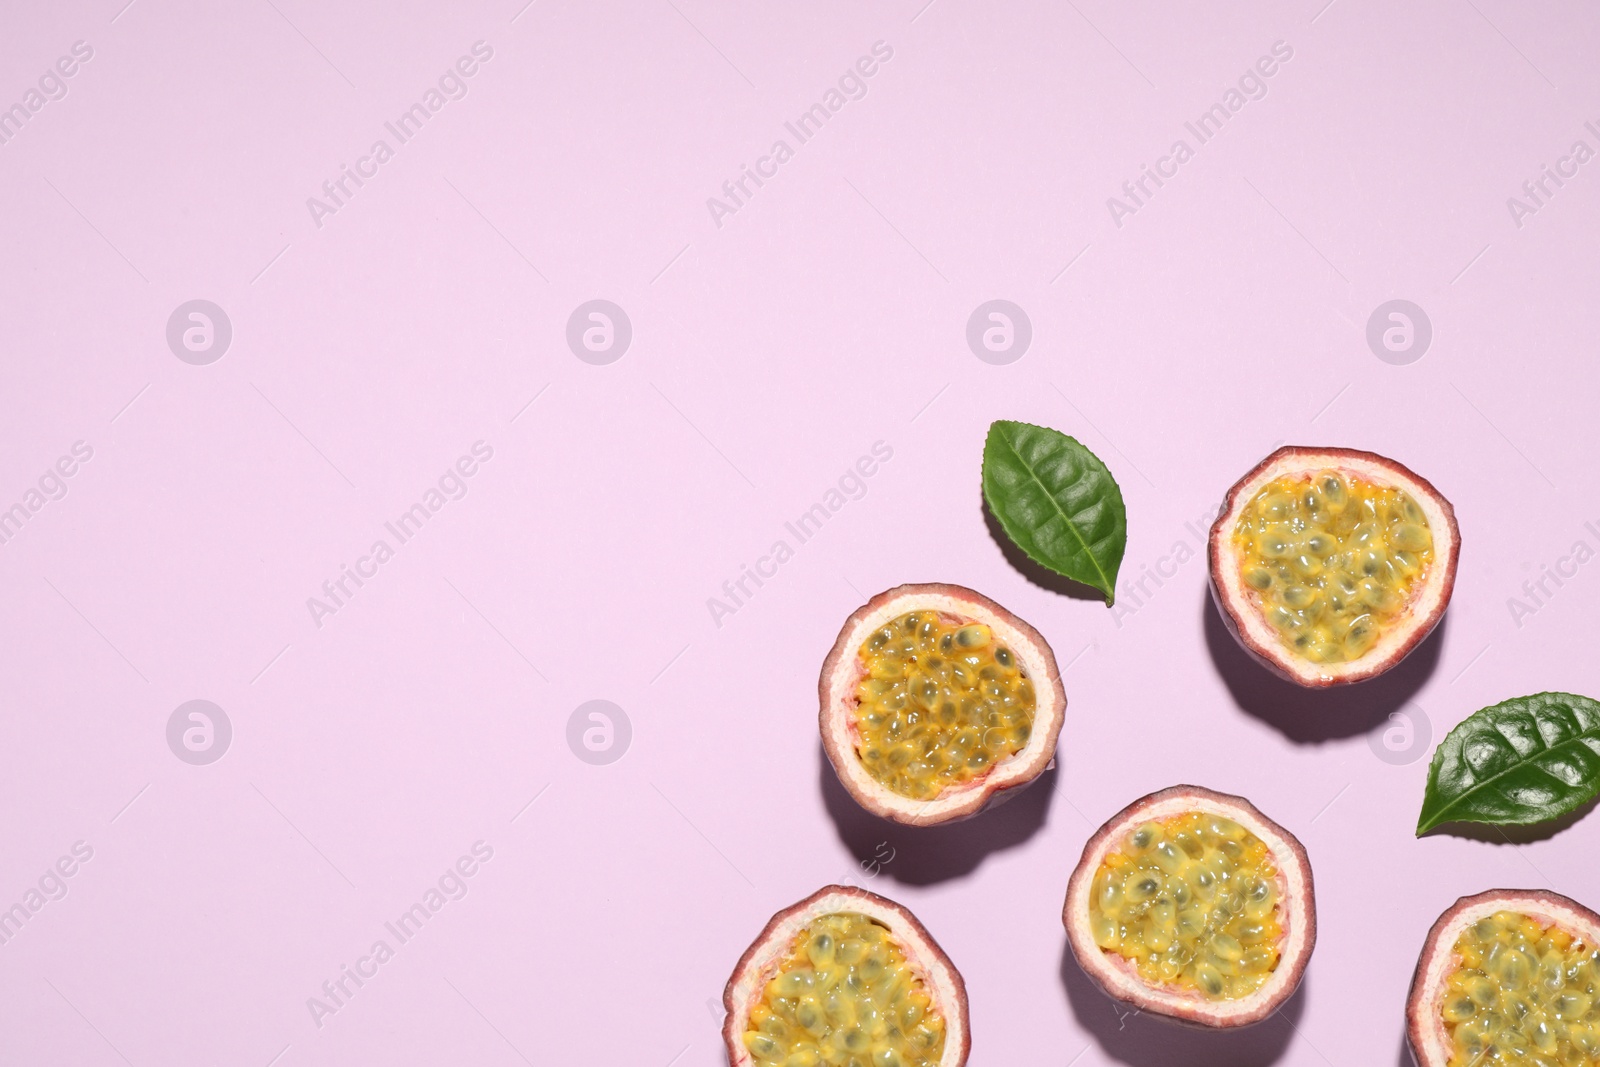 Photo of Halves of passion fruits (maracuyas) and green leaves on pink background, flat lay. Space for text